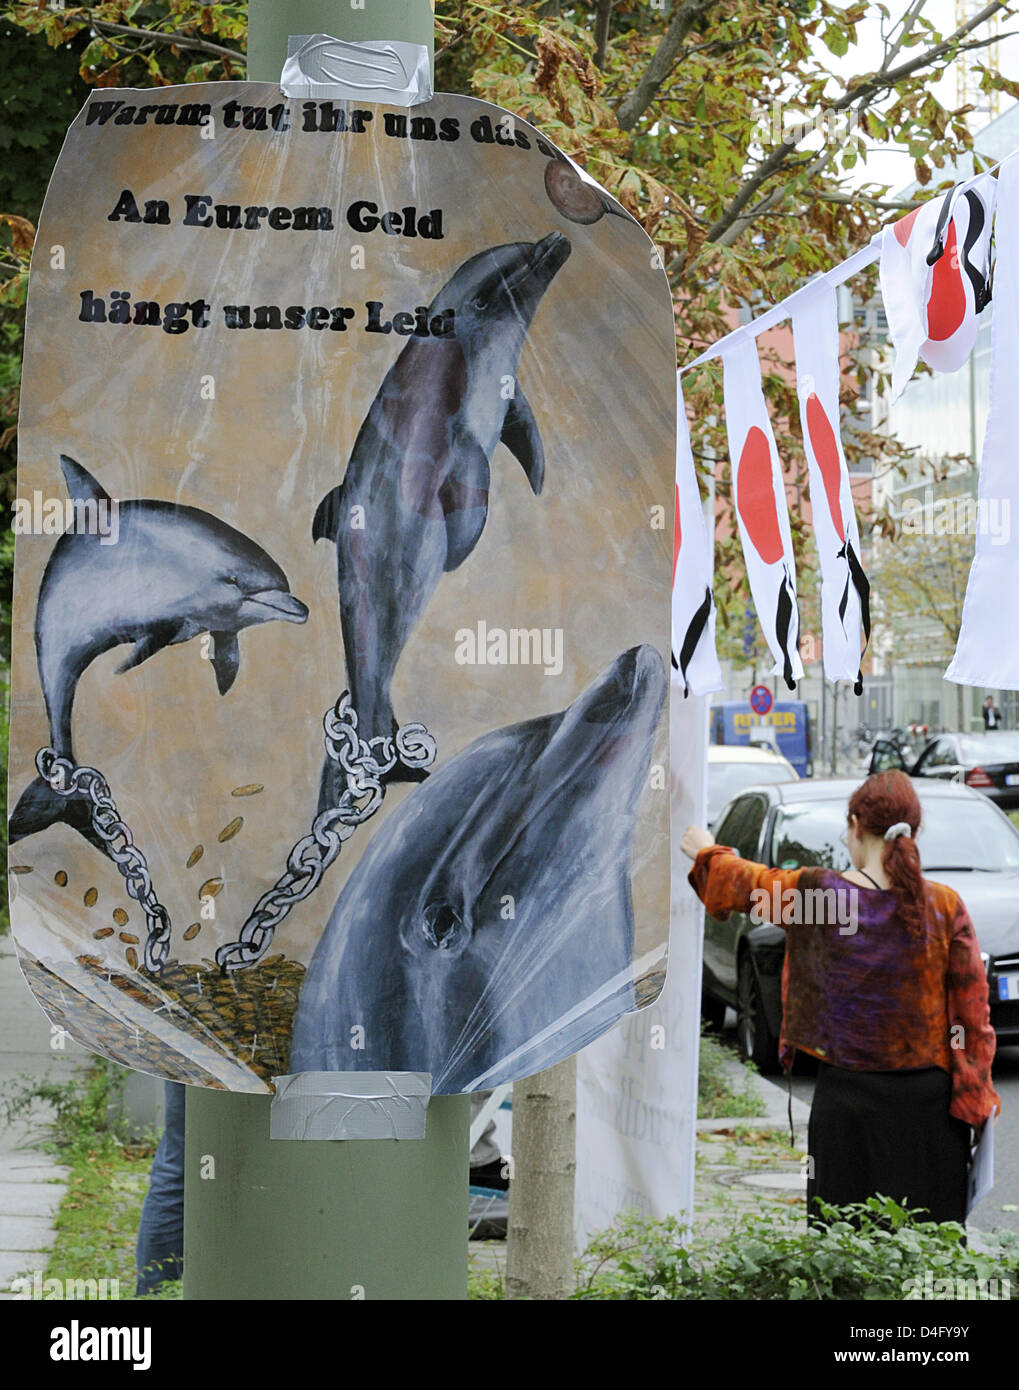 During a protest of the Whale and Dolphin Conservation Society (WDSF) the yearly fishing of dolphins in Japan is criticized in front of the Japanese embassy (seen in the background) in Berlin, Germany, 03 September 2008. According to WDSF, the Japanese embassy published the fishing quota for dolphins of the year 2007 with 20826 specimen. Japan justifies the fishing of dolphins by t Stock Photo